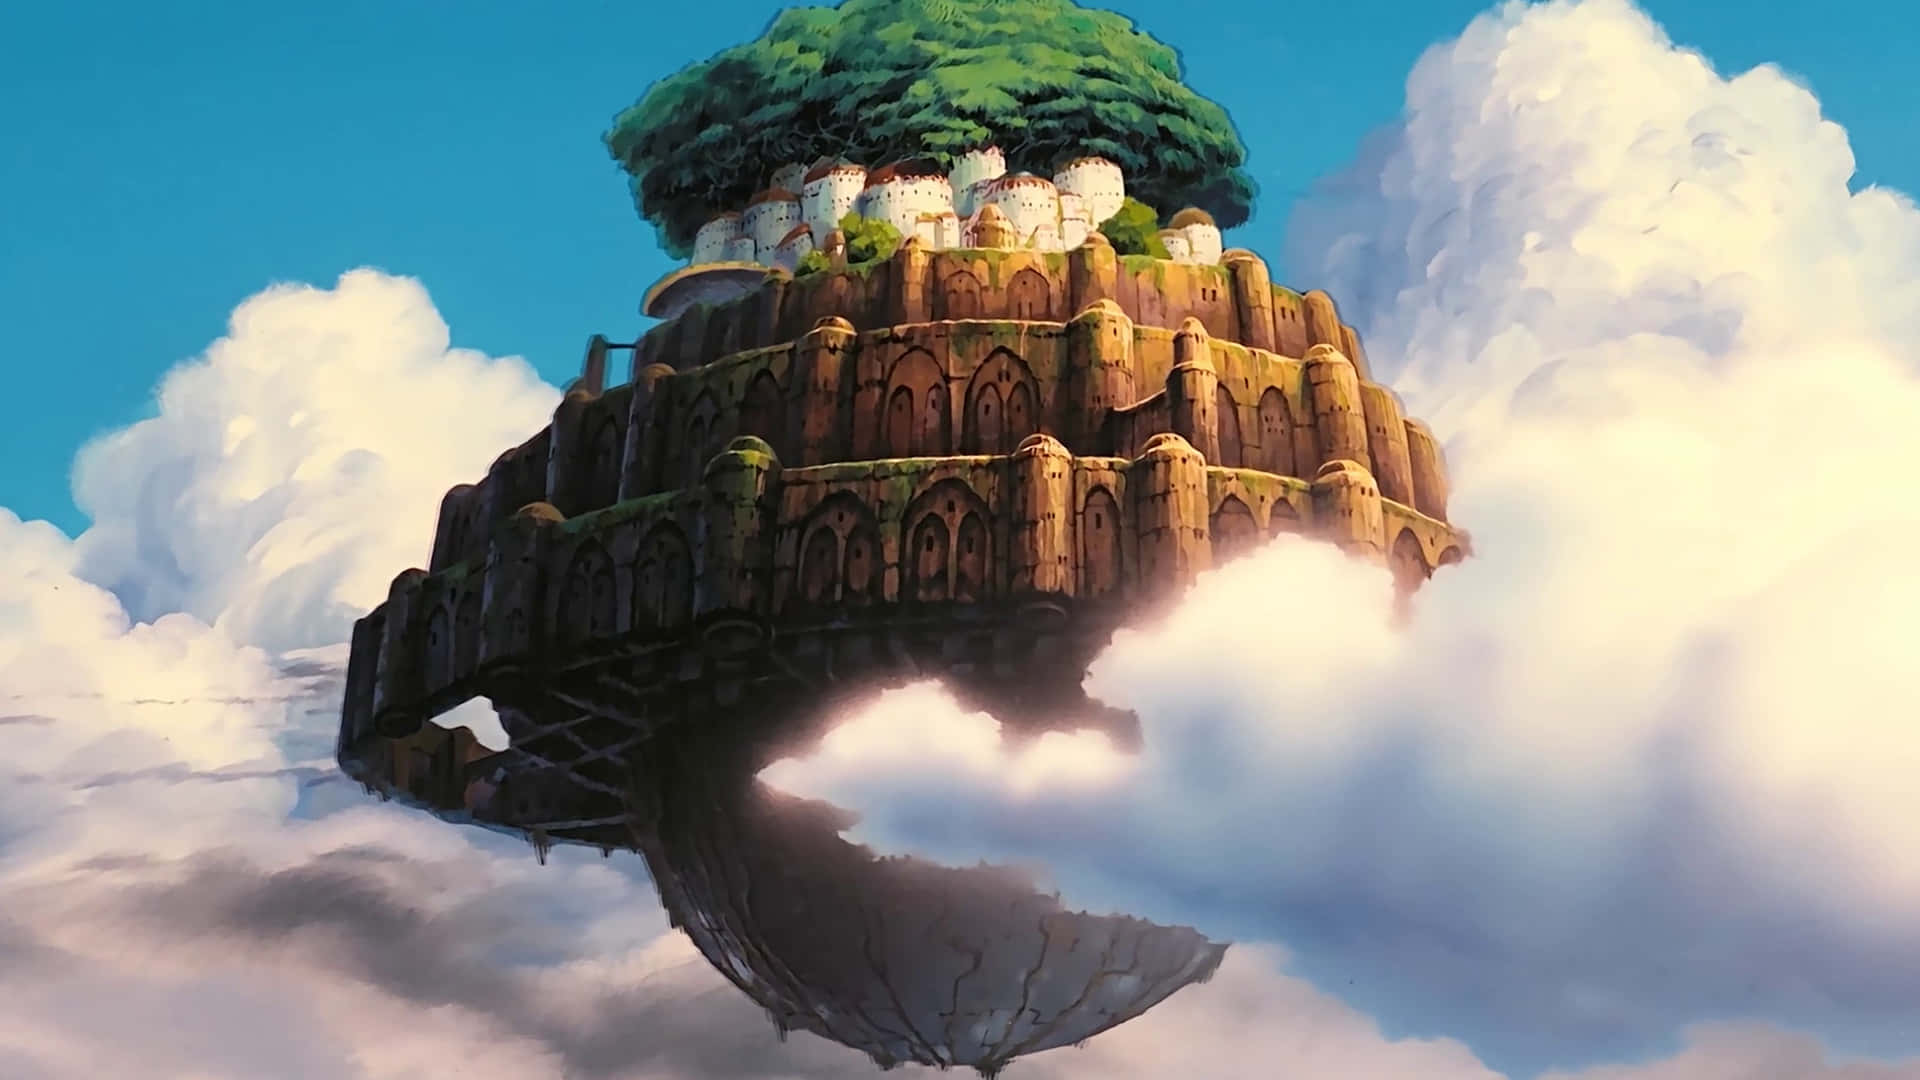 Enchanting Studio Ghibli Art featuring beloved characters and magical scenery Wallpaper